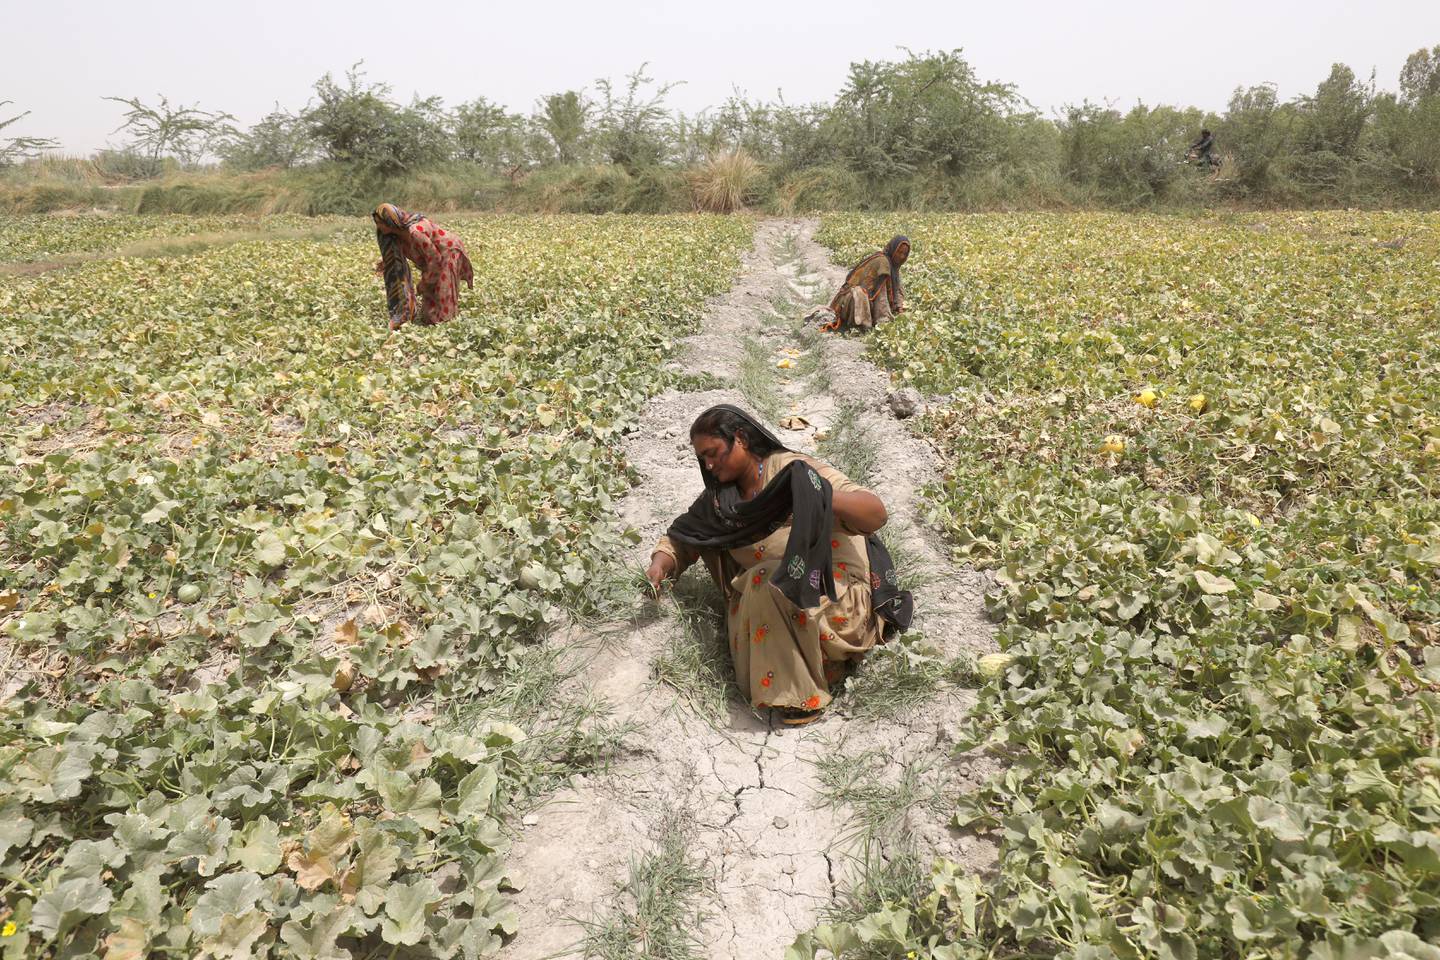 Women clear unwanted grass at a muskmelon farm, during a heatwave, on the outskirts of Jacobabad, Pakistan, in May. Reuters